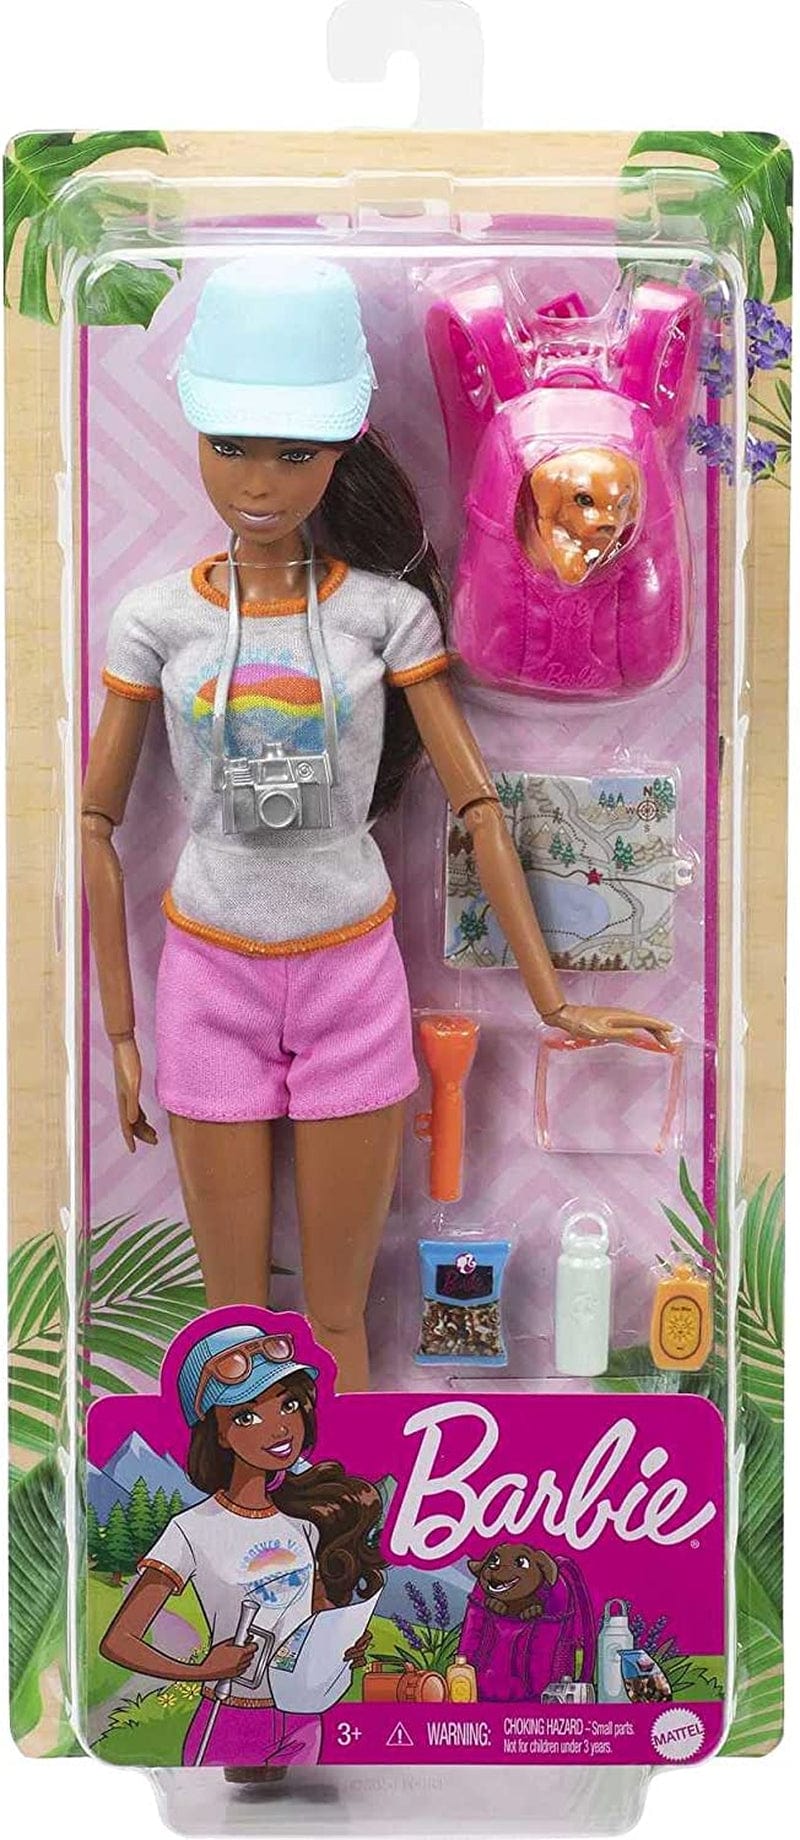 Barbie Hiking Doll, Brunette, with Puppy & 9 Accessories, Including Backpack Pet Carrier, Map, Camera & More, Gift for Kids 3 to 7 Years Old Sporting Goods > Outdoor Recreation > Winter Sports & Activities Mattel   